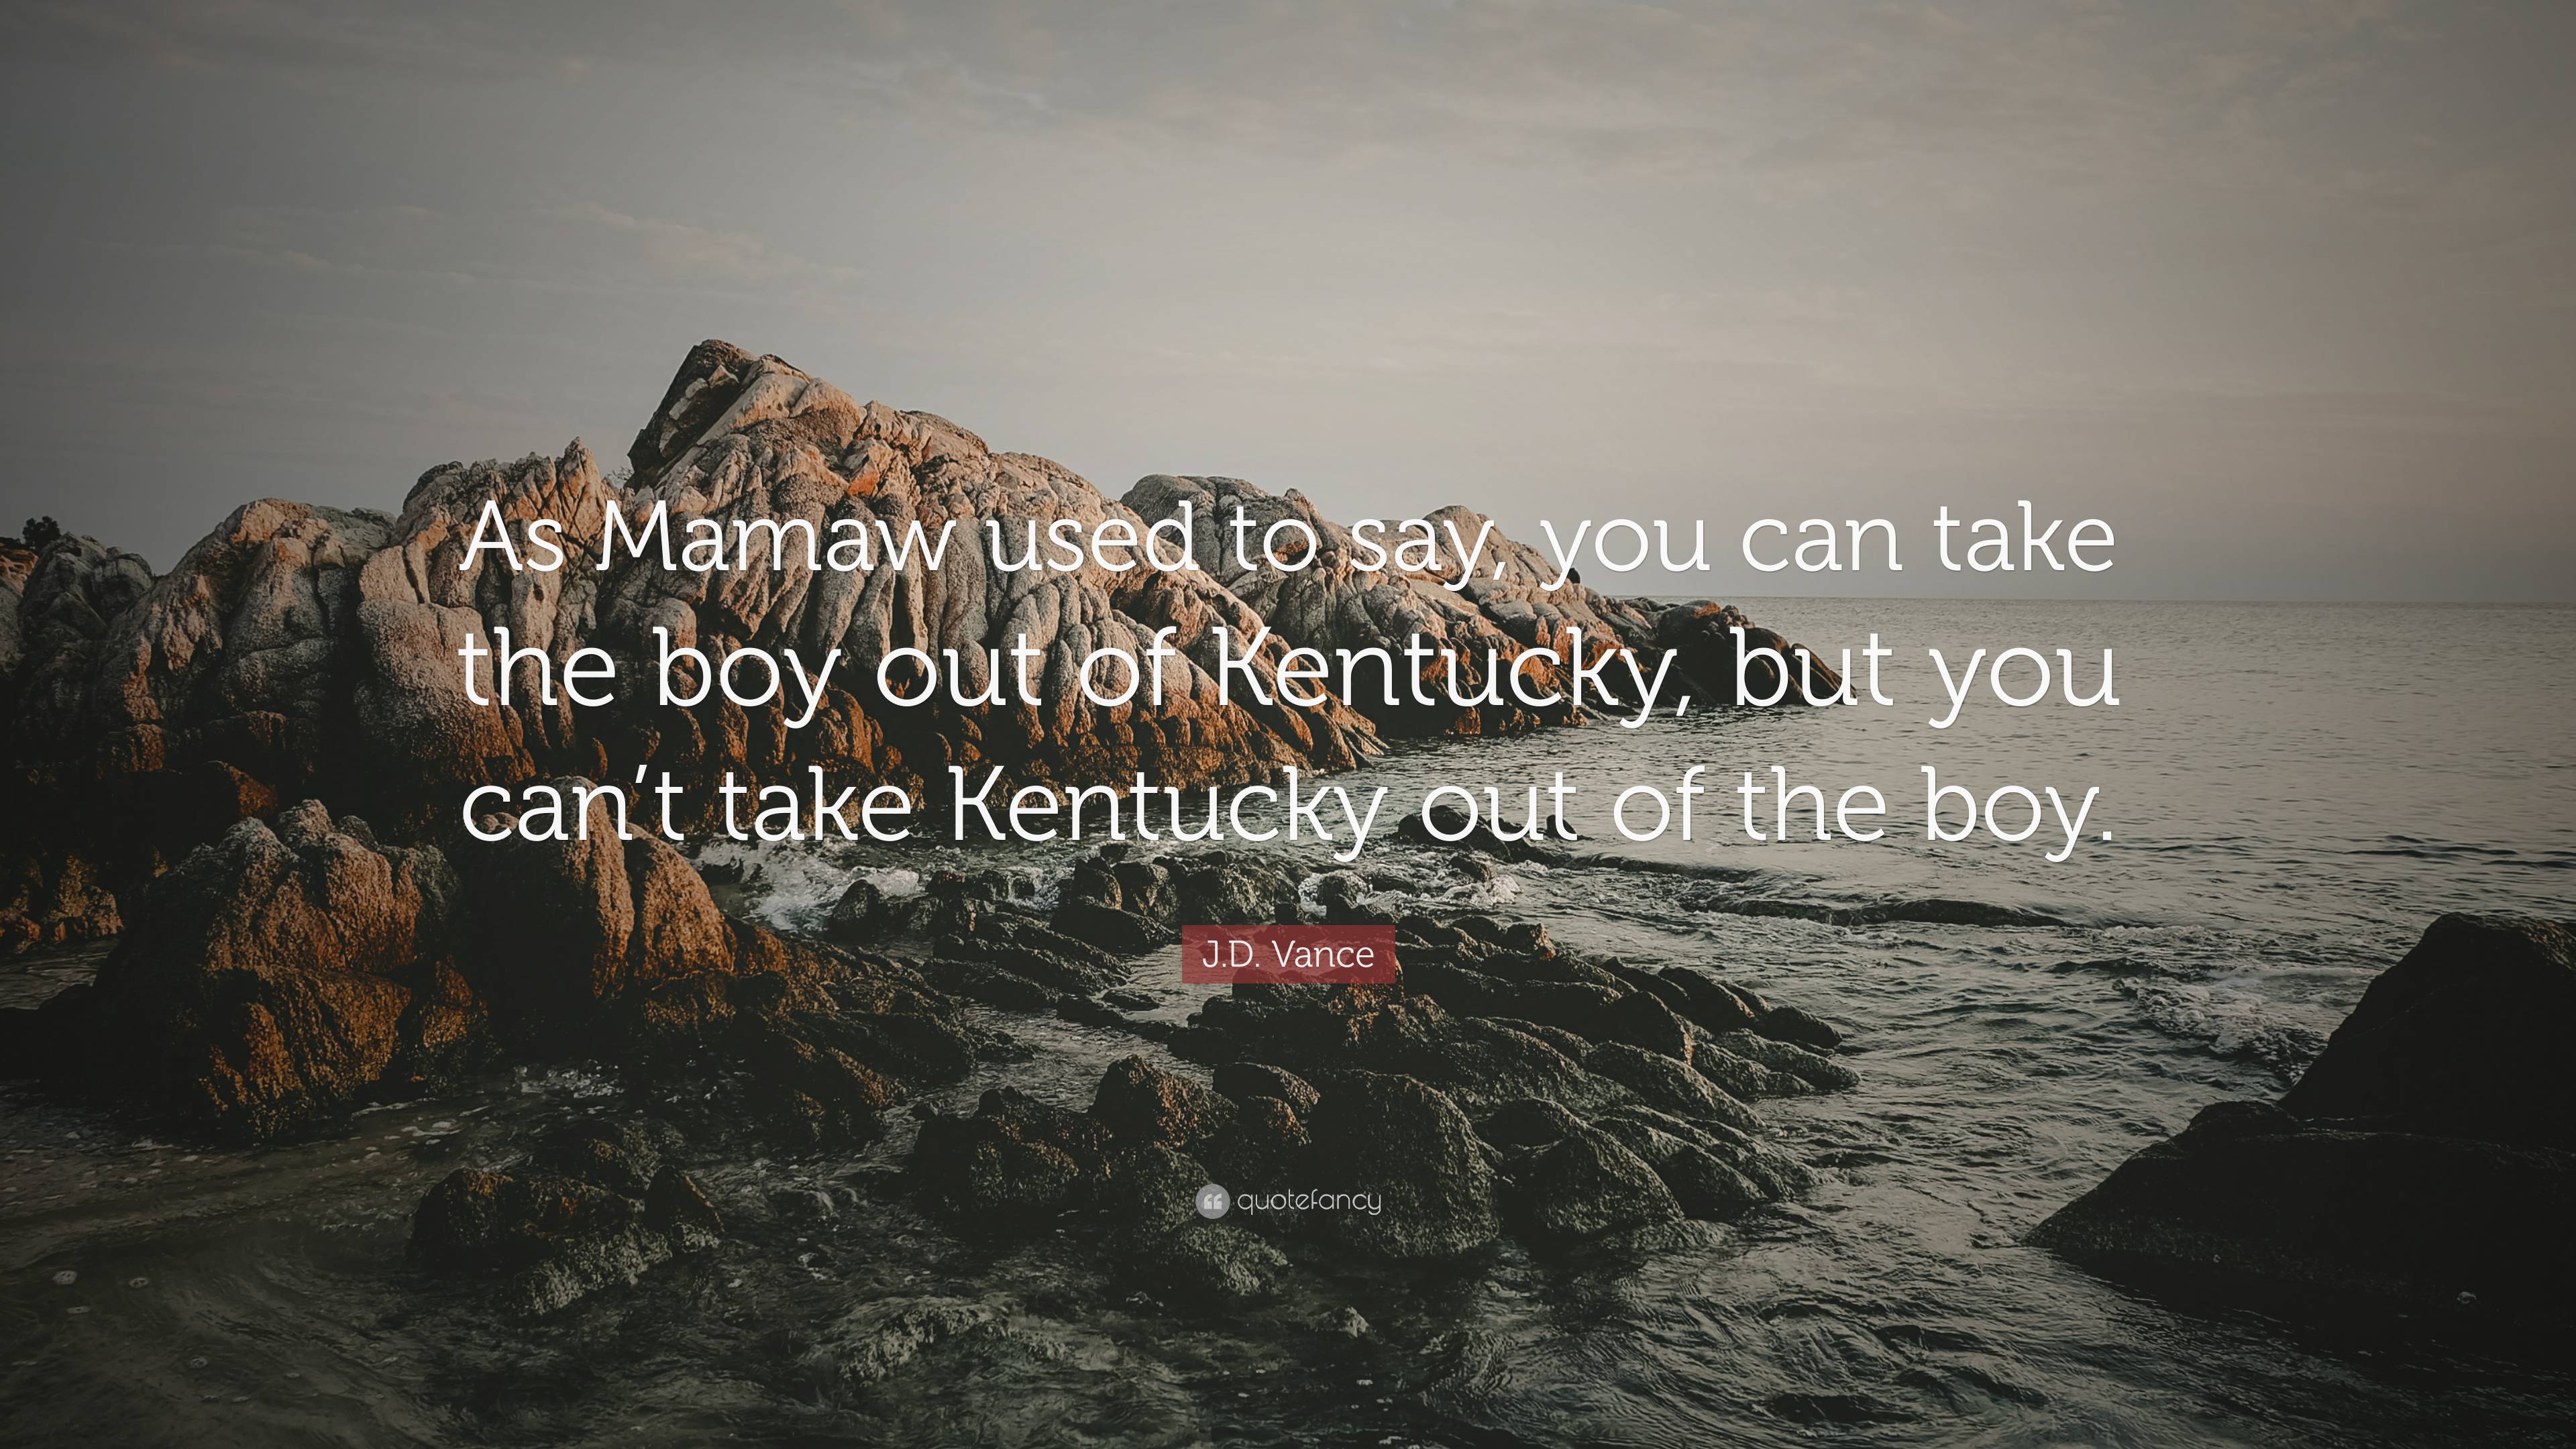 Jd Vance Quote “as Mamaw Used To Say You Can Take The Boy Out Of Kentucky But You Cant 8978